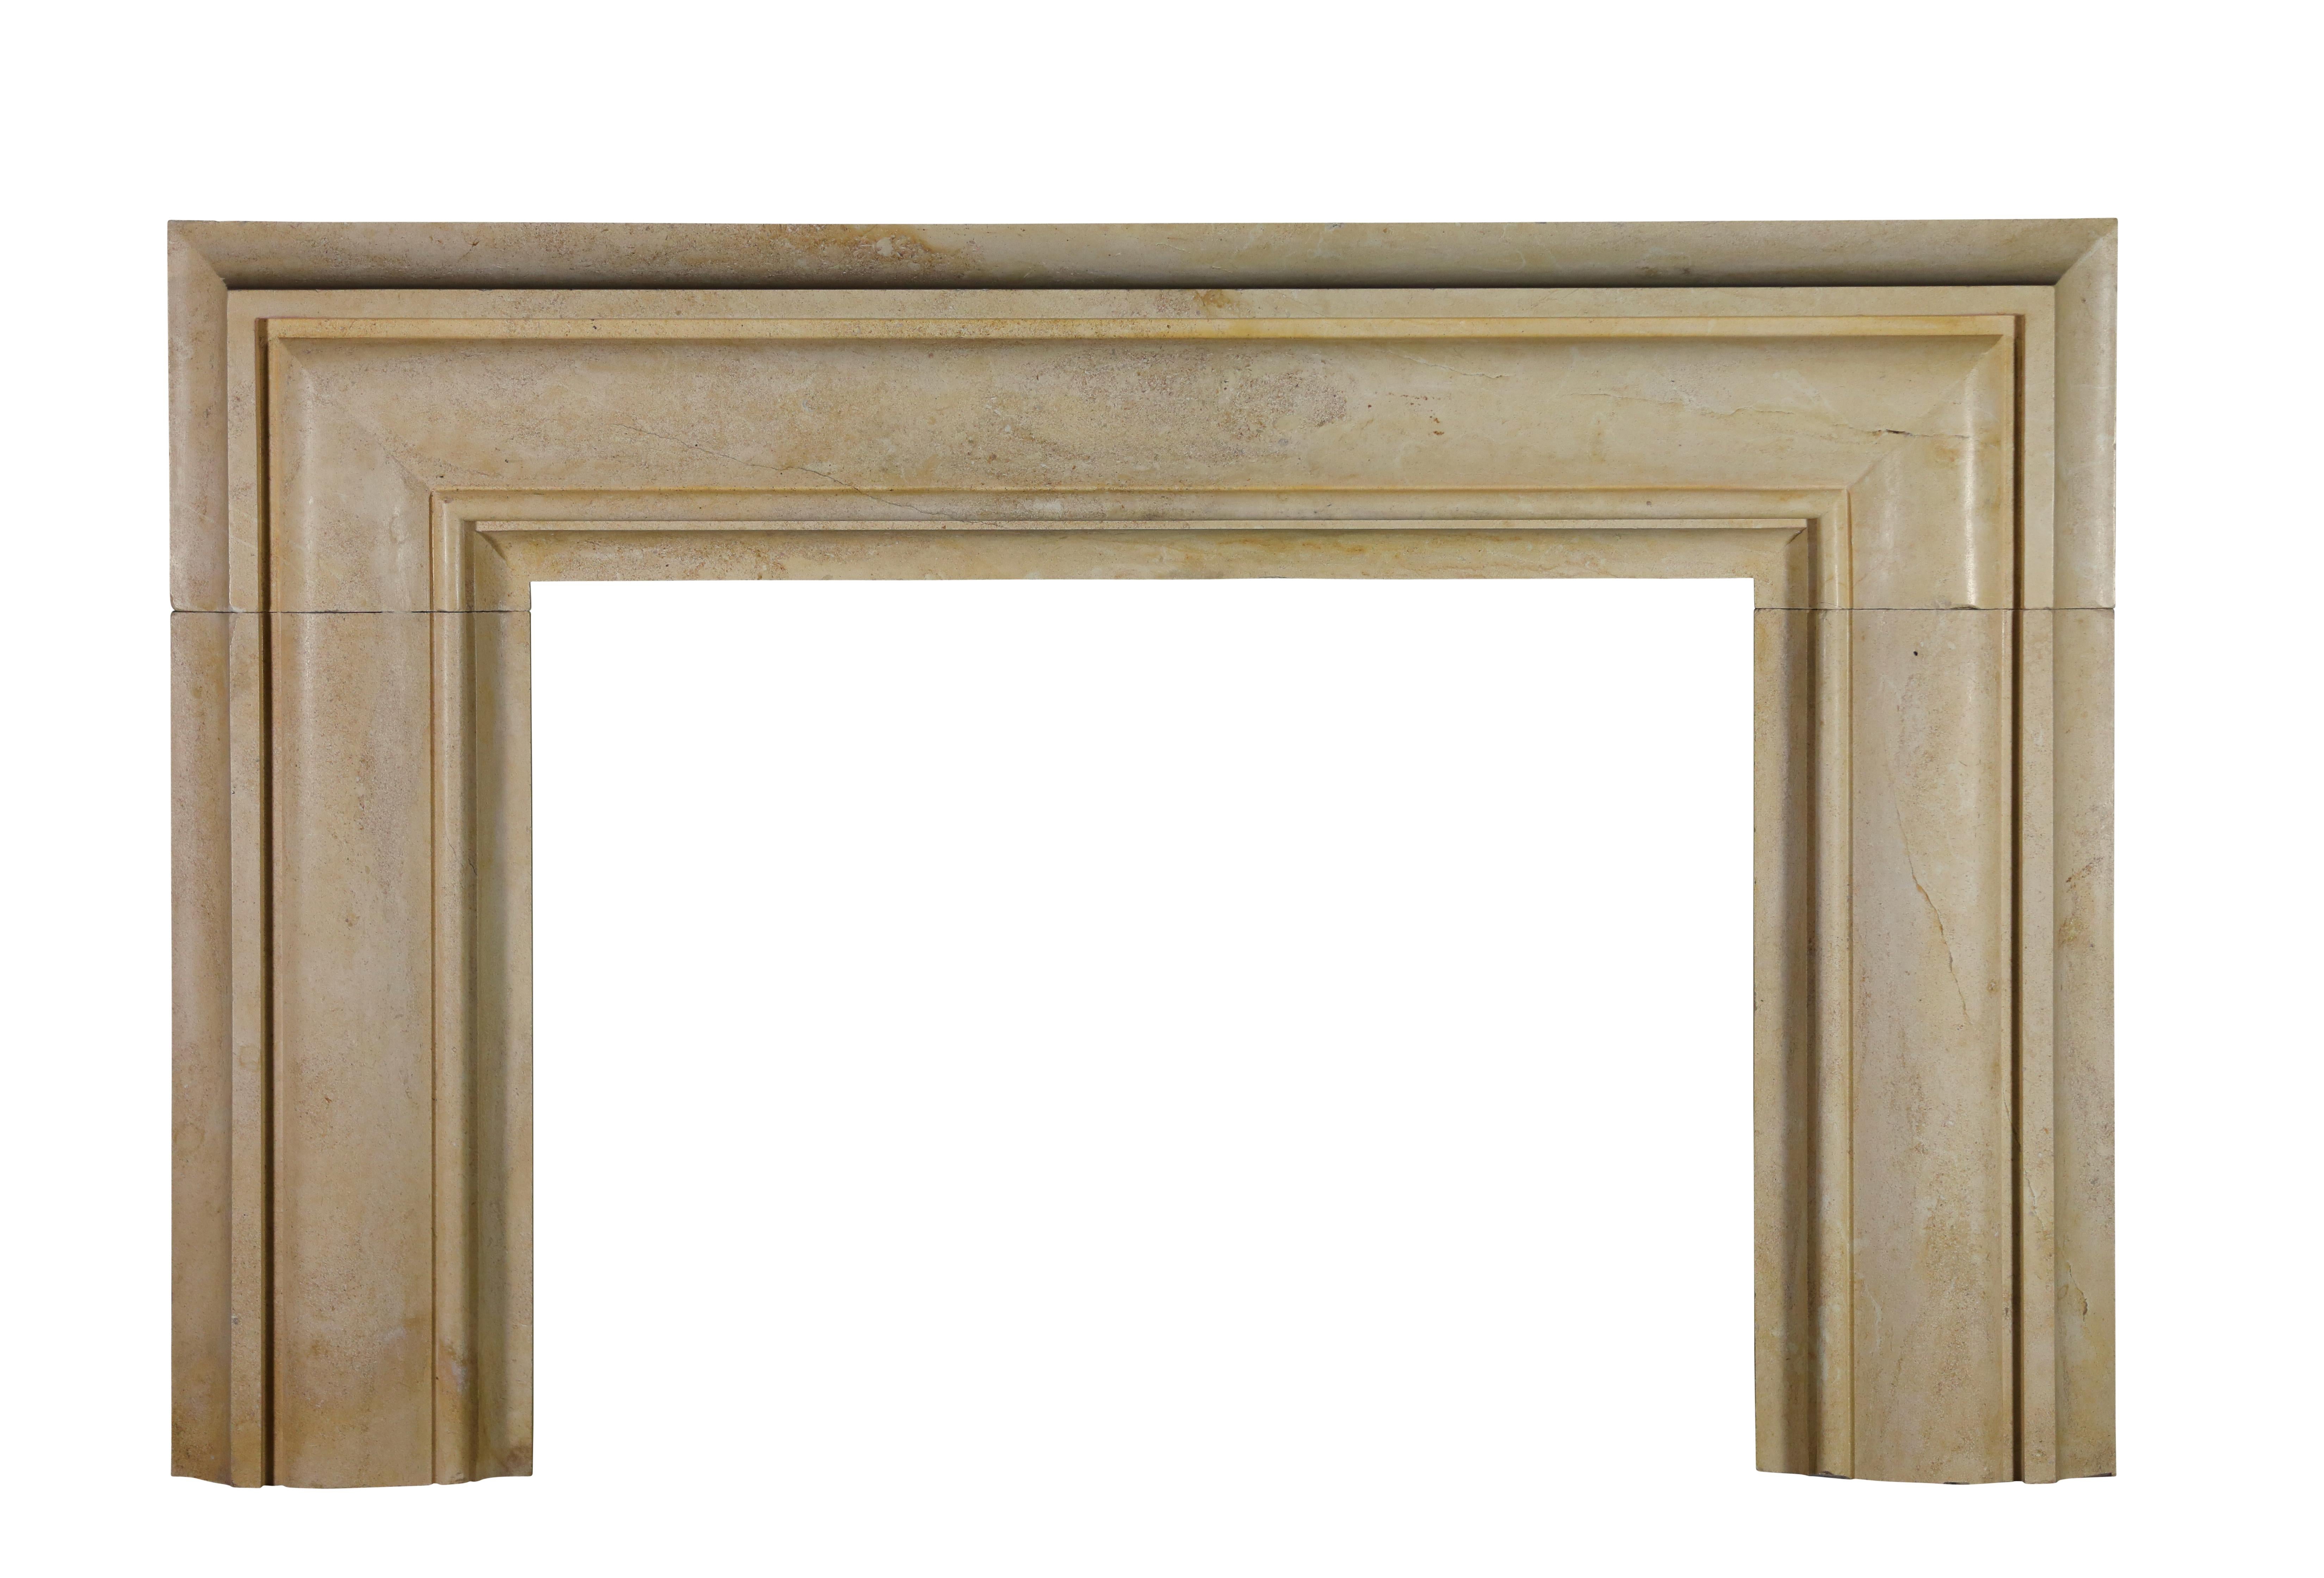 Timeless Bolection Stone Fireplace Surround.
Ultimate grand proportions for an original grand fireplace decor. Late 19th century from France. Lots of images to show the natural stone. The shade adapts to the light of the room.
The decorative